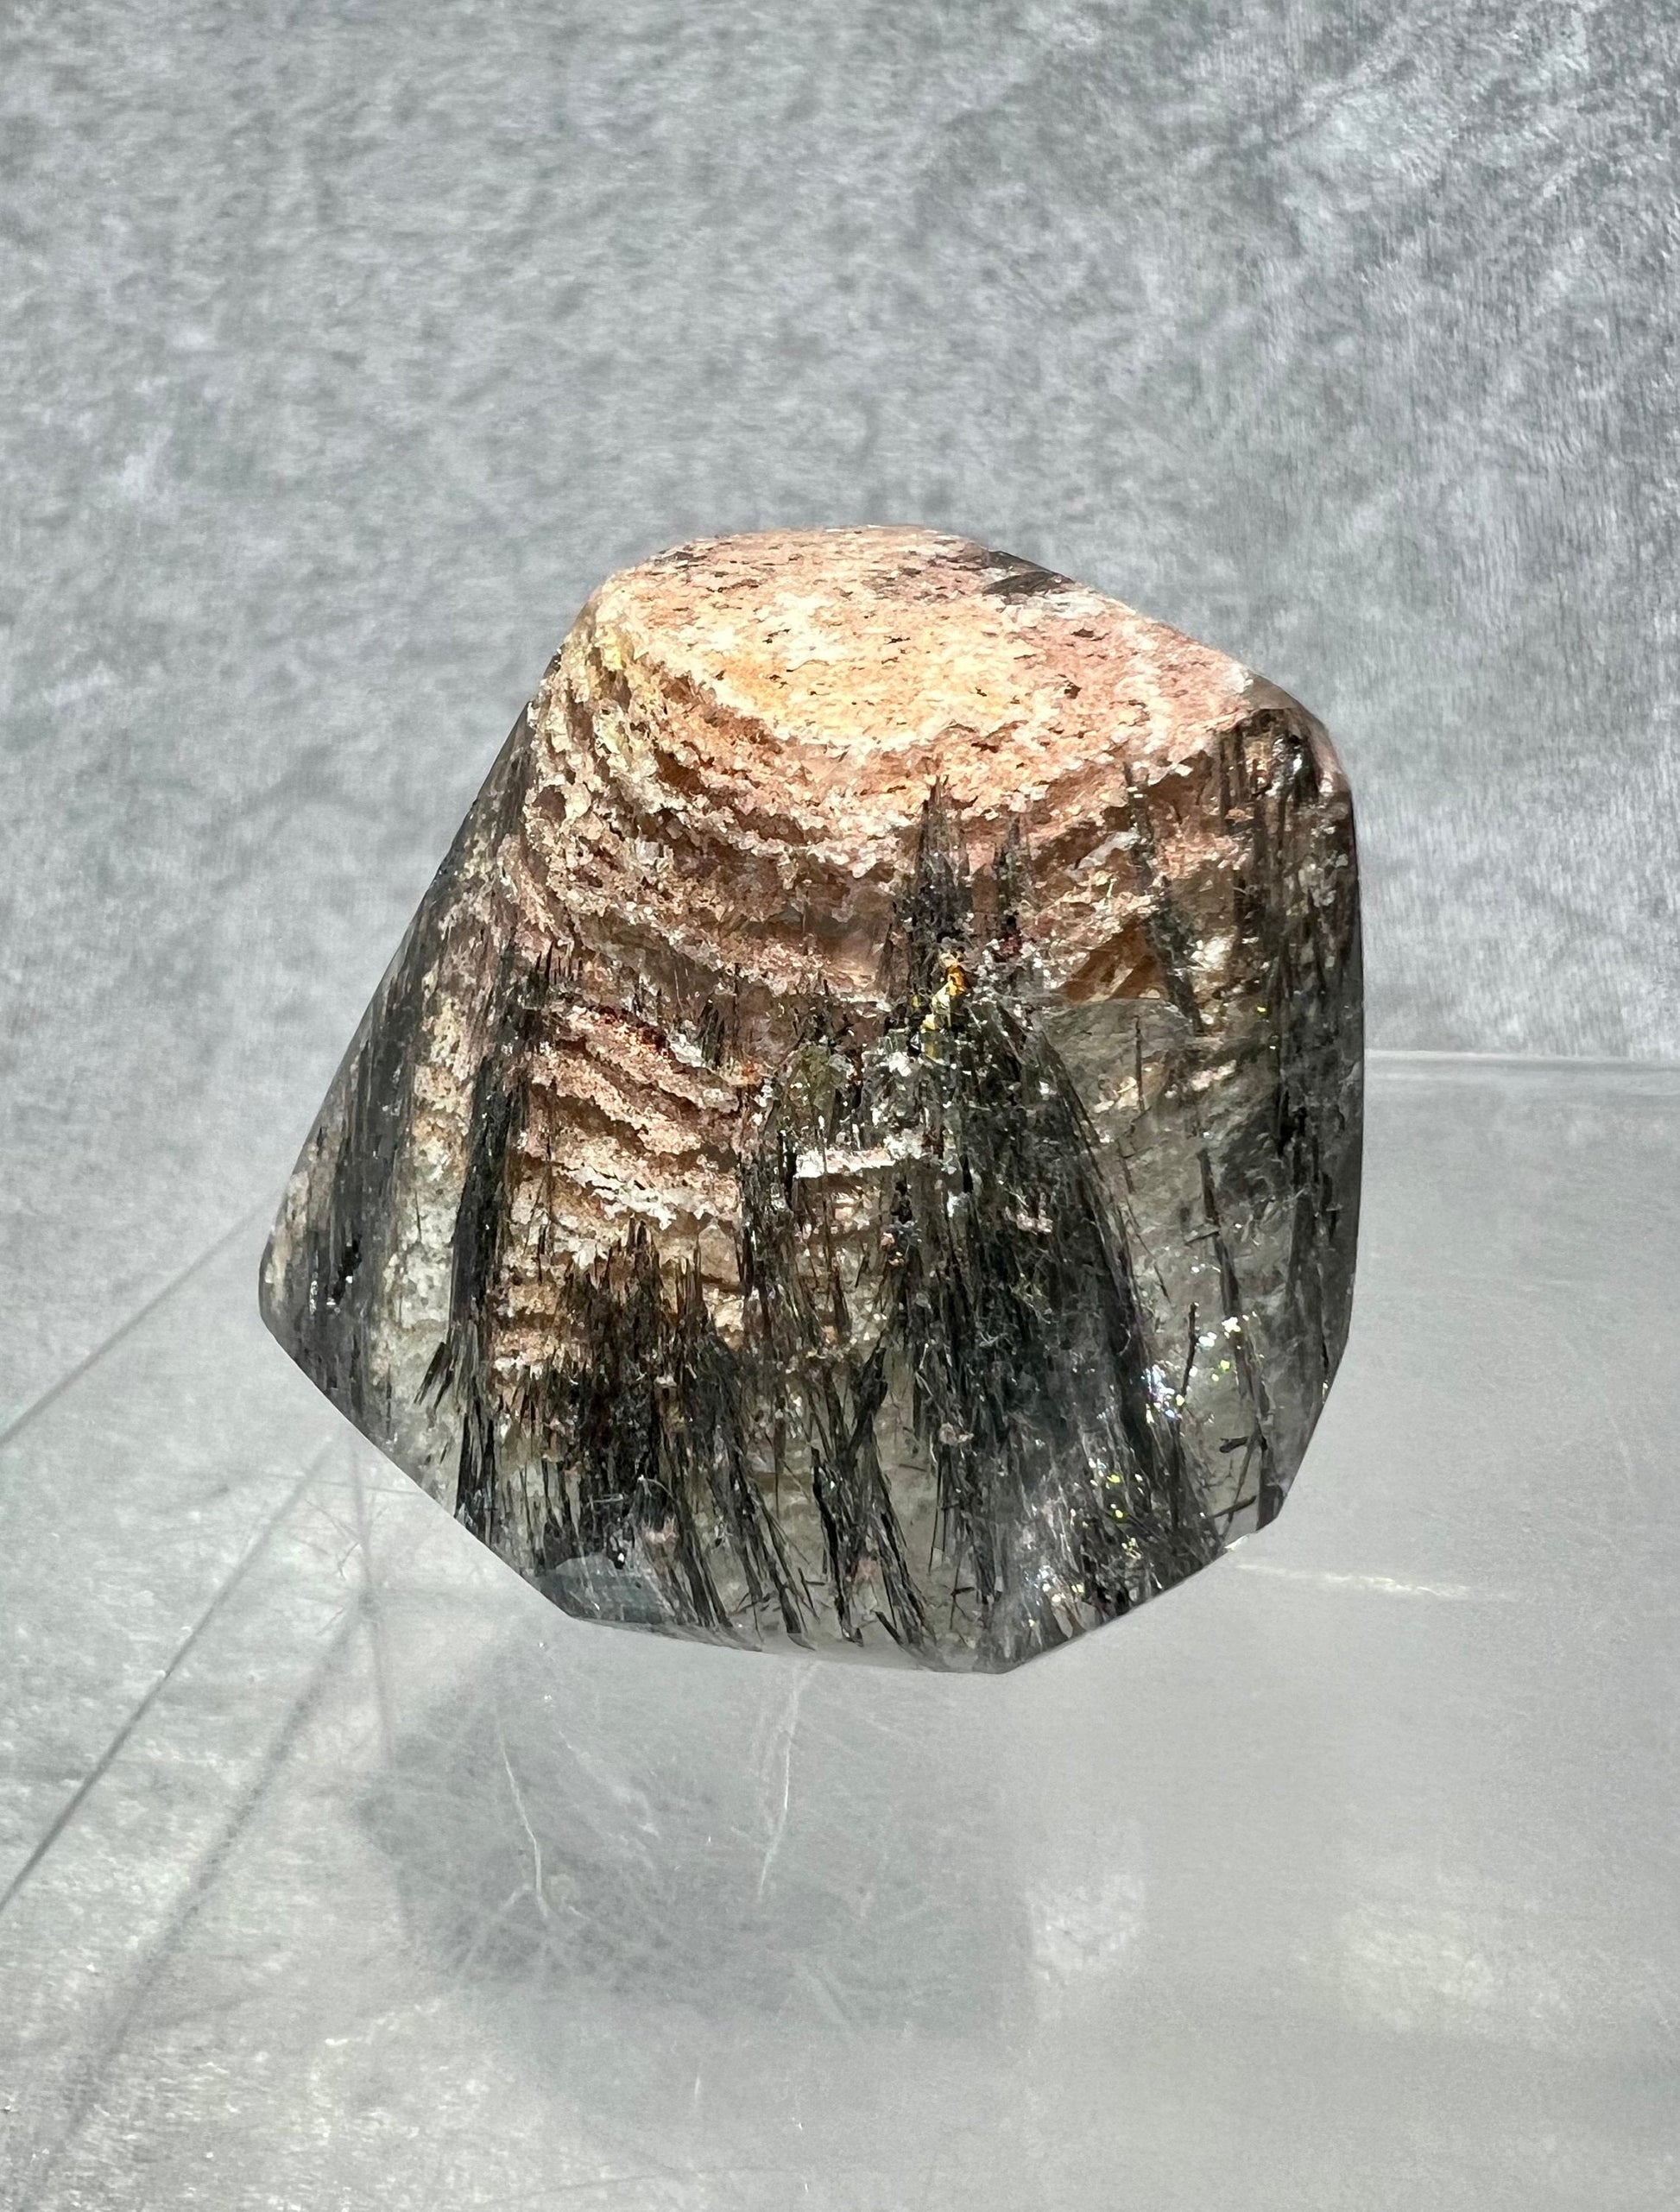 High Quality Rutile And Pink Garden Quartz Freeform. Amazing Rare Silver Rutiles With Pink And White 1000 Layer Quartz. Very High Quality